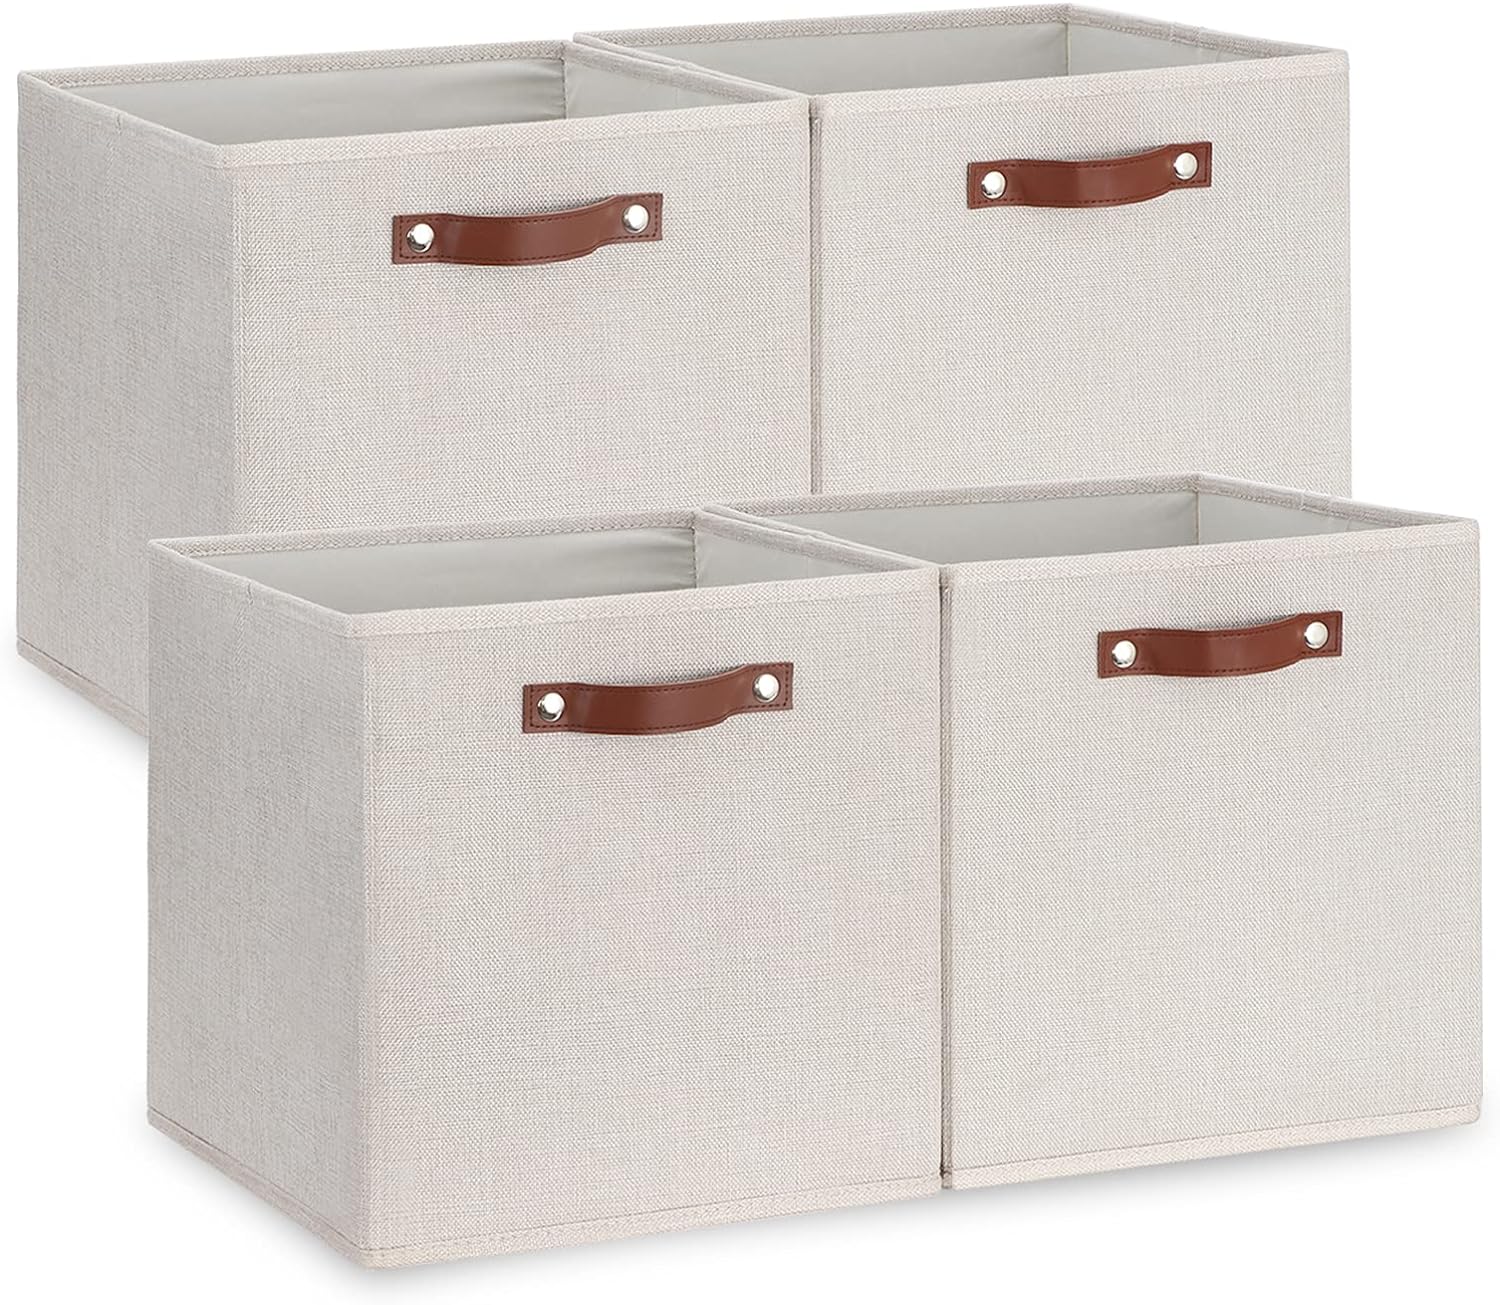 Temary Fabric Storage Cubes Storage Bins with Dual Leather Handles, 4 Pack Cube Baskets 13x13 Foldable Cube Organizers for Shelves, Home, Office, Nursery